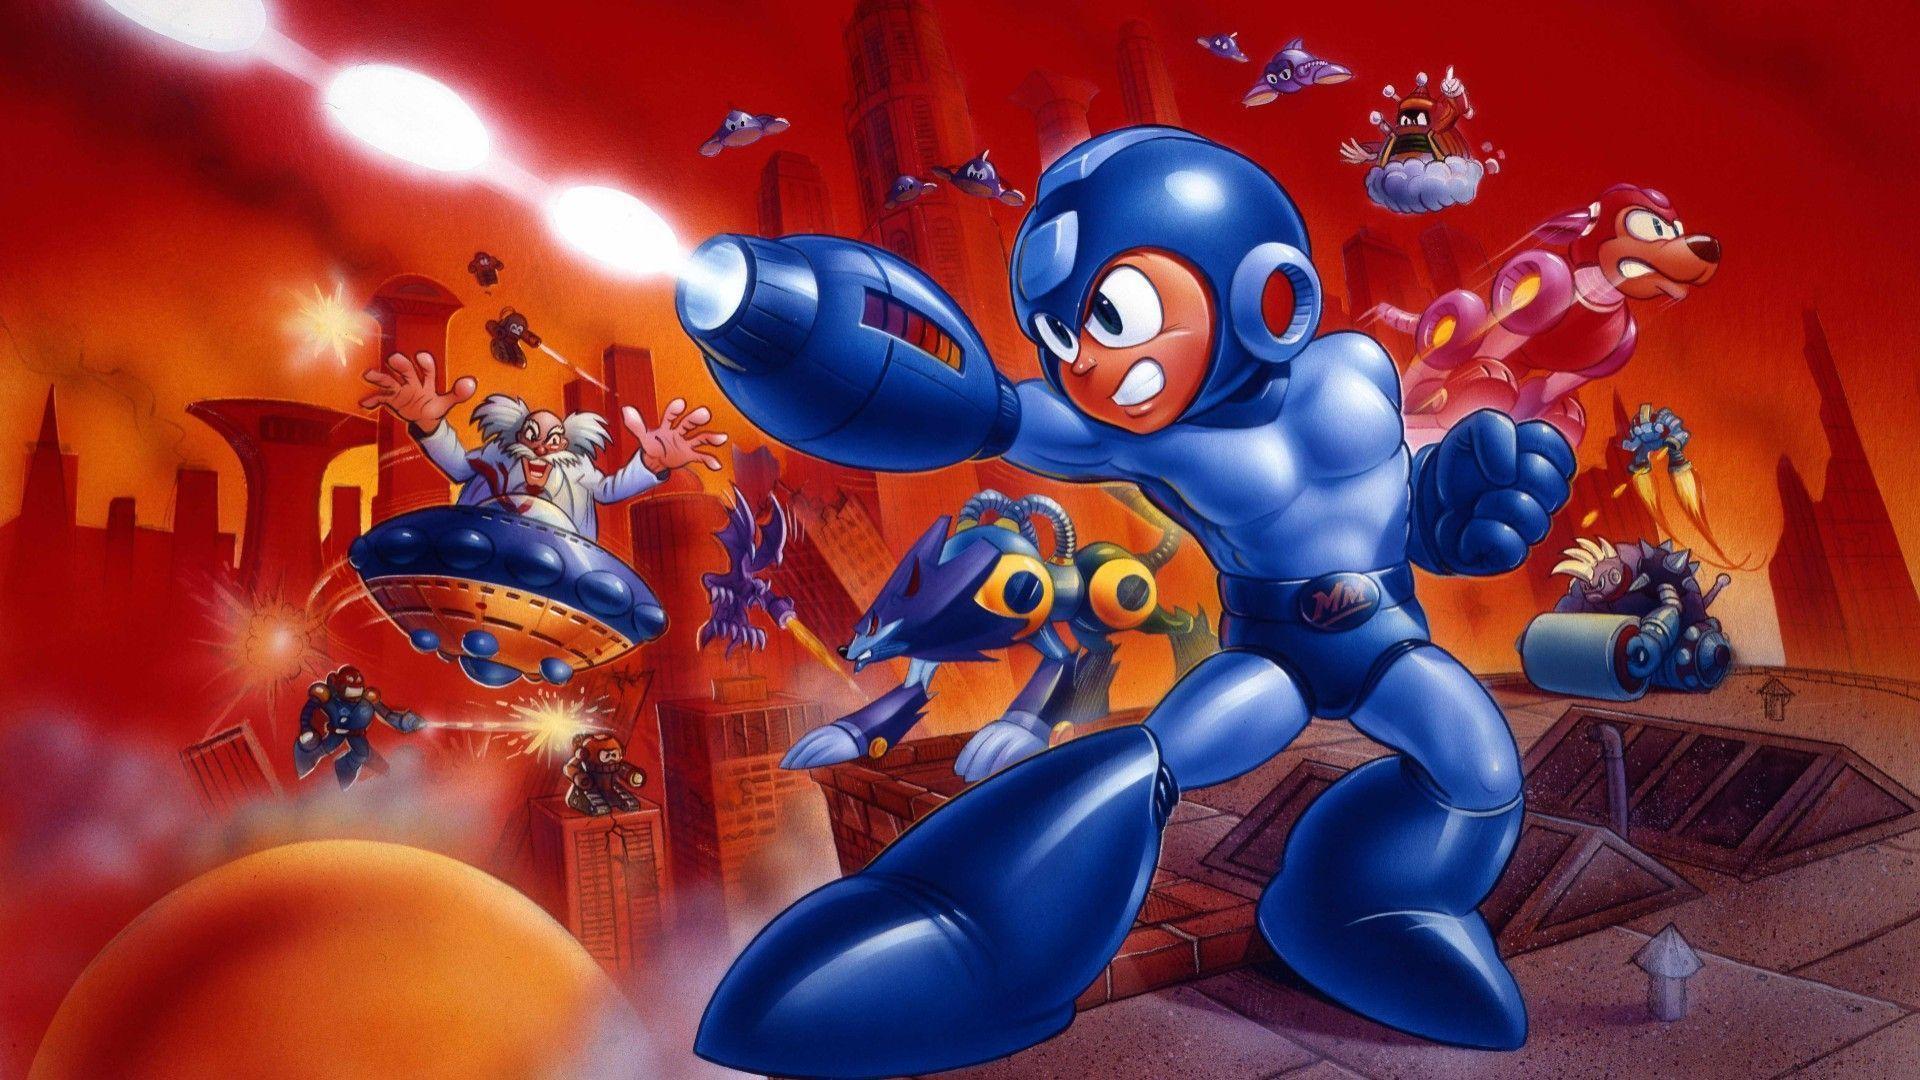 megaman x wallpaper 10 - Image And Wallpaper free to